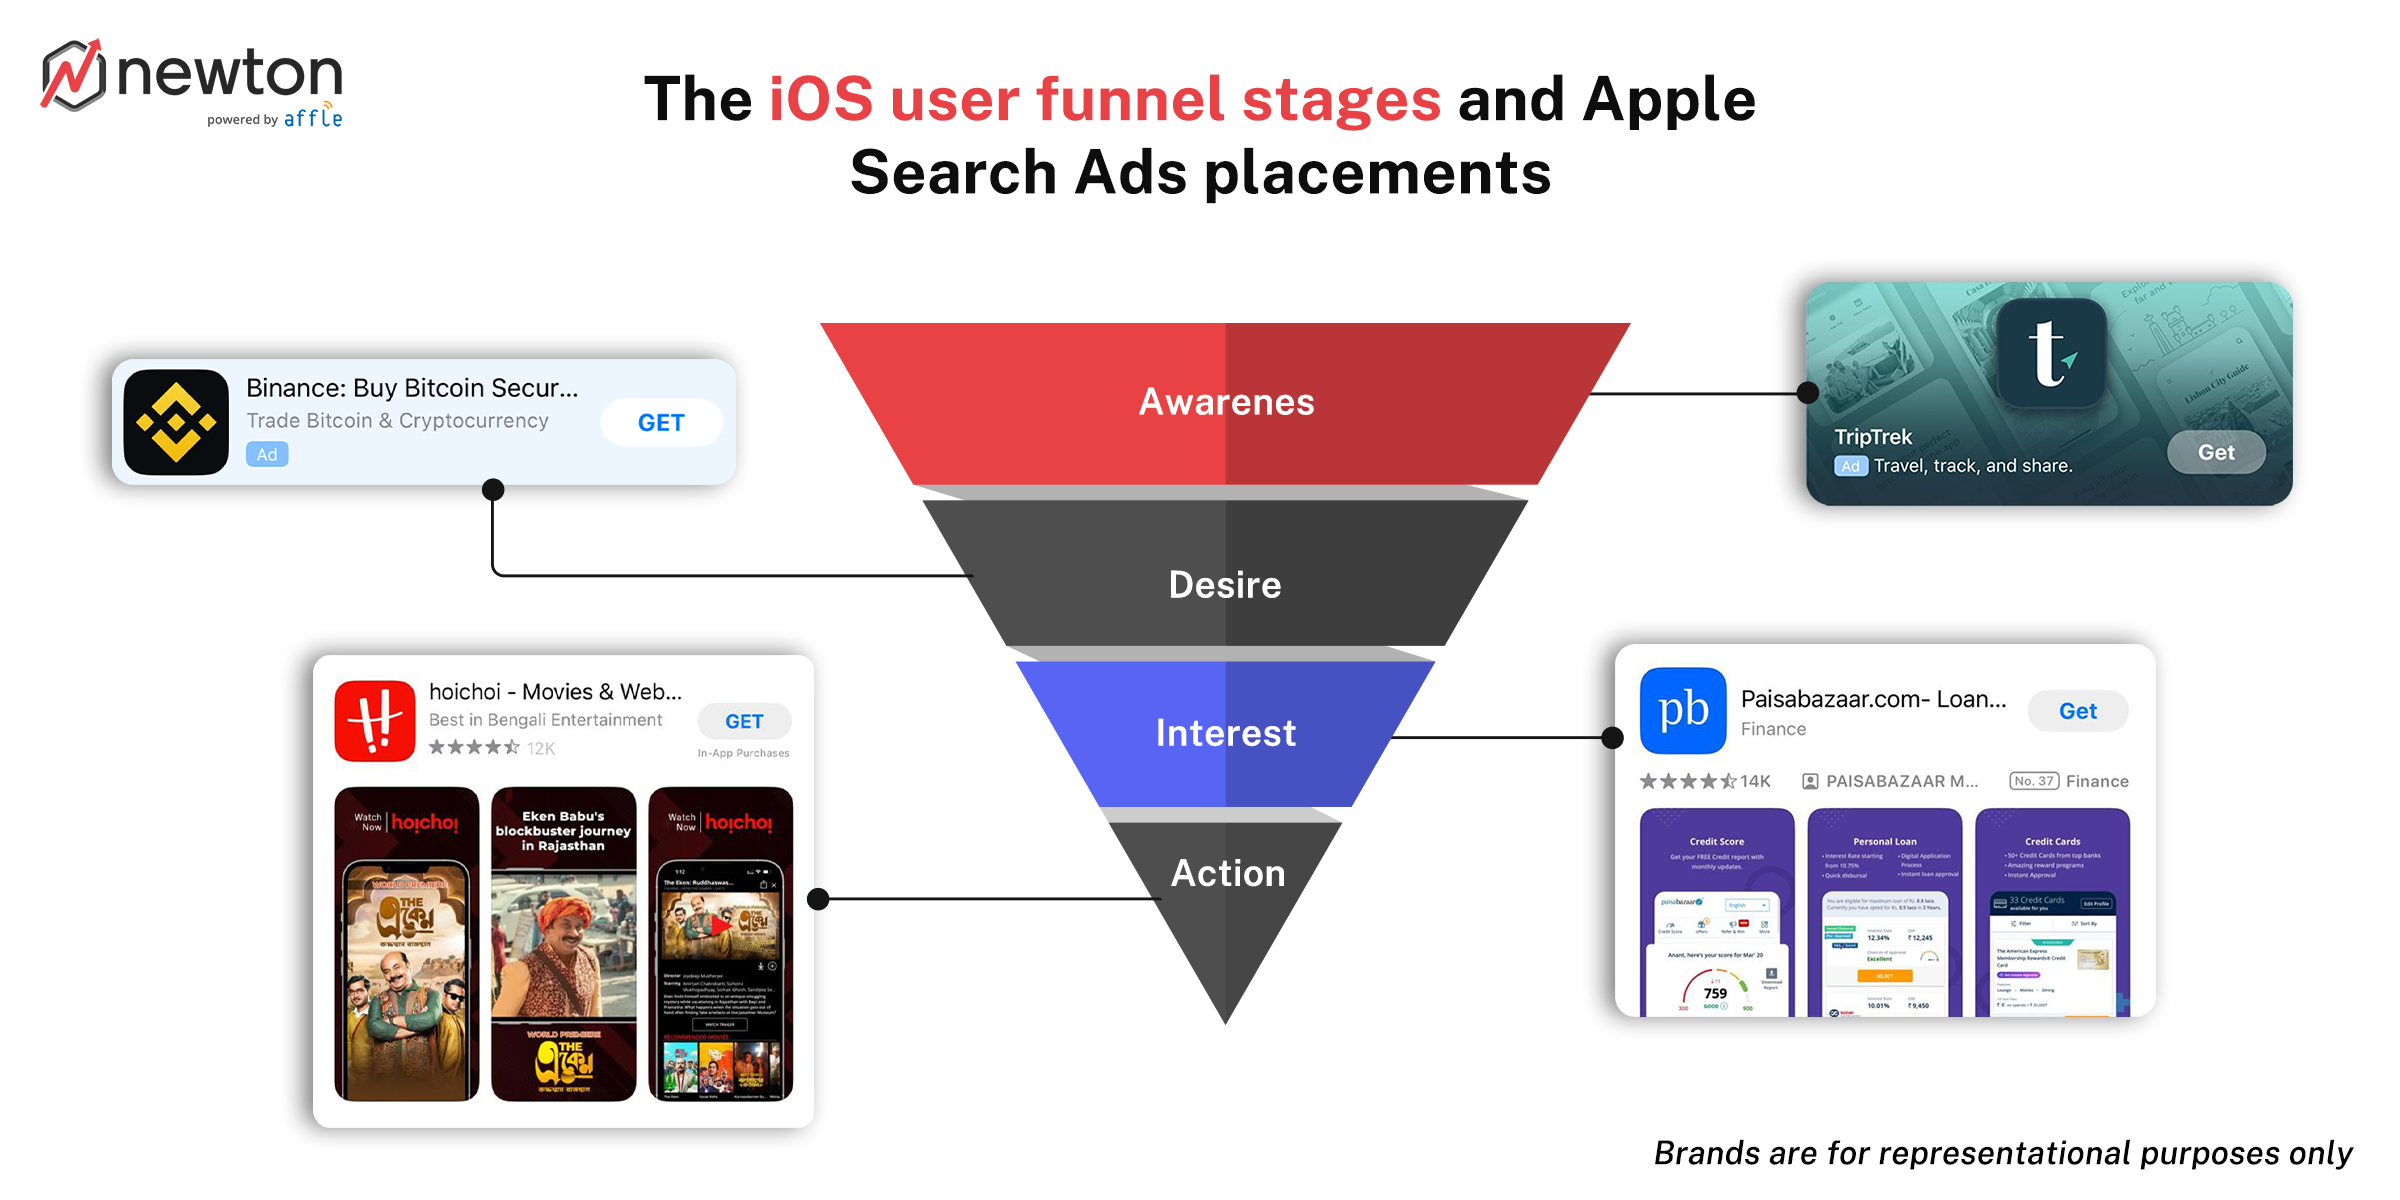 apple-search-ads-placements-by-user-journey